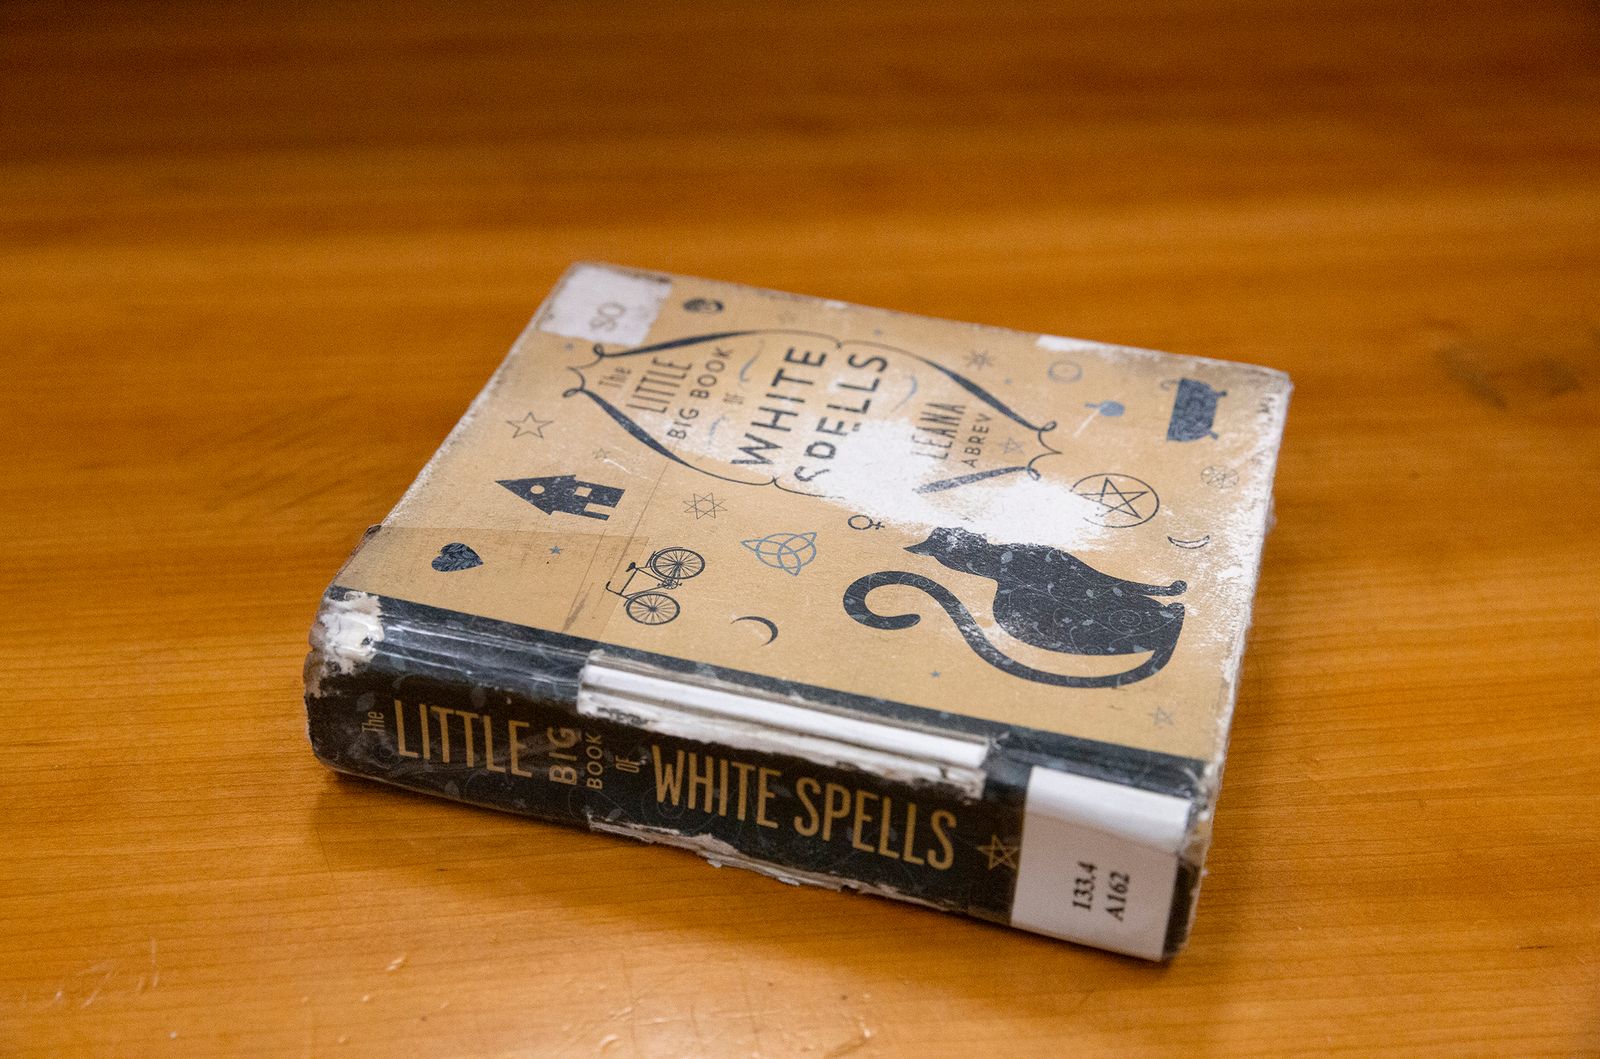 © Allison Stewart - The Little Book of White Spells, 2017 edition, Los Angeles Public Library, California. 2019